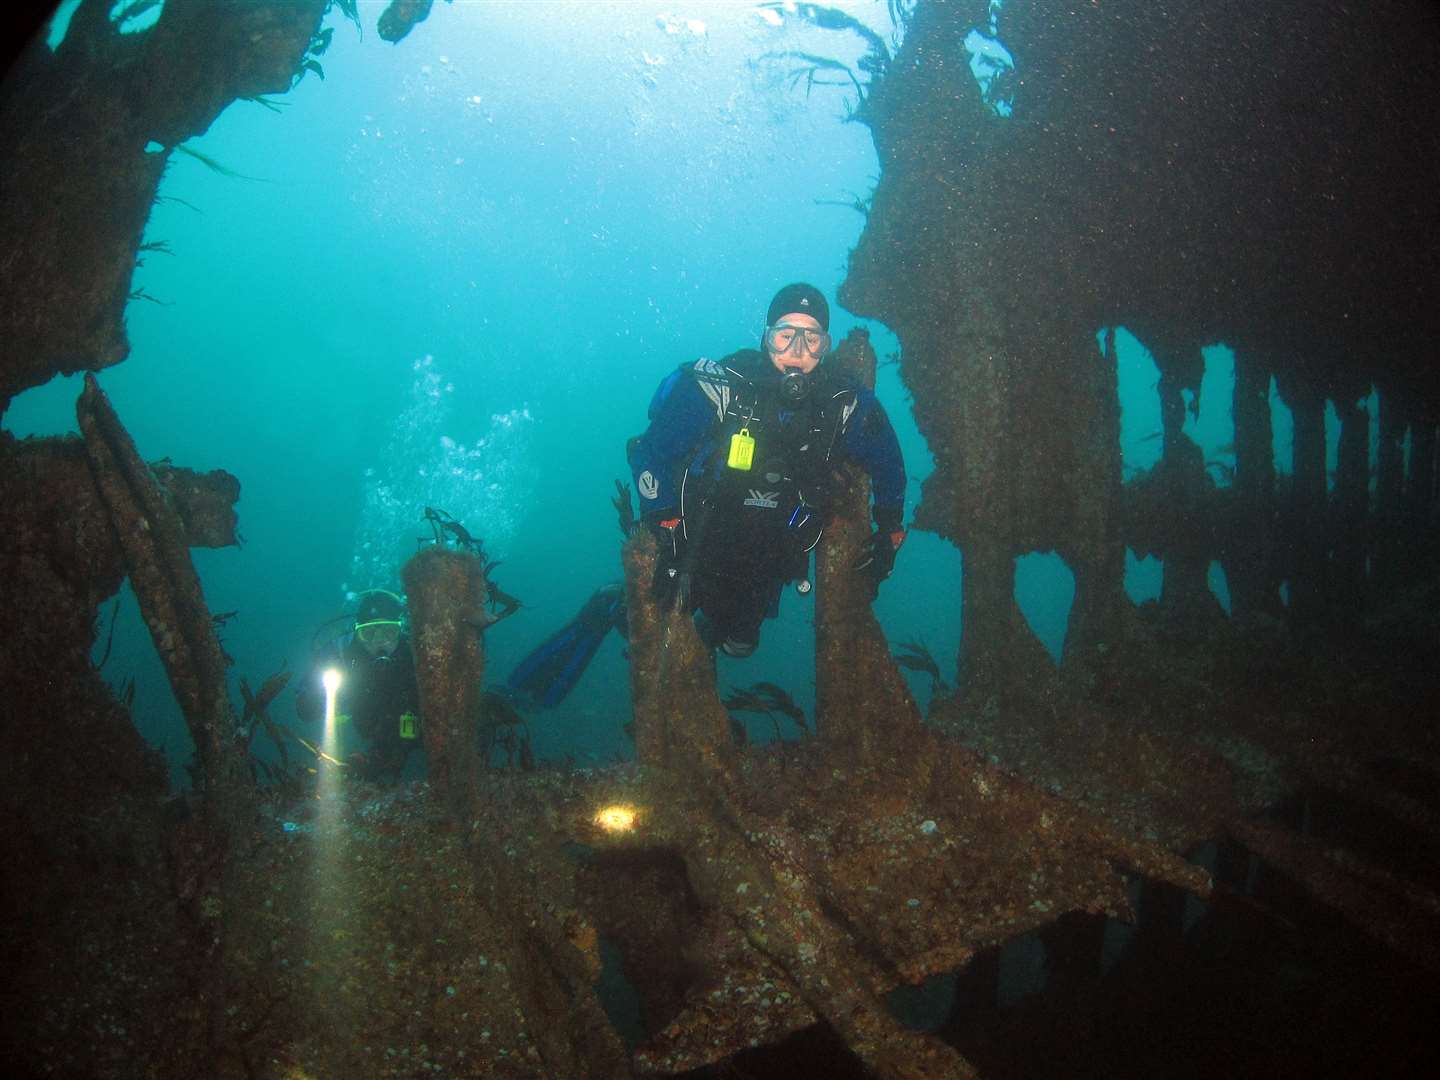 Diver entering the wreck of the Tabarka, a Scapa Flow blockship.